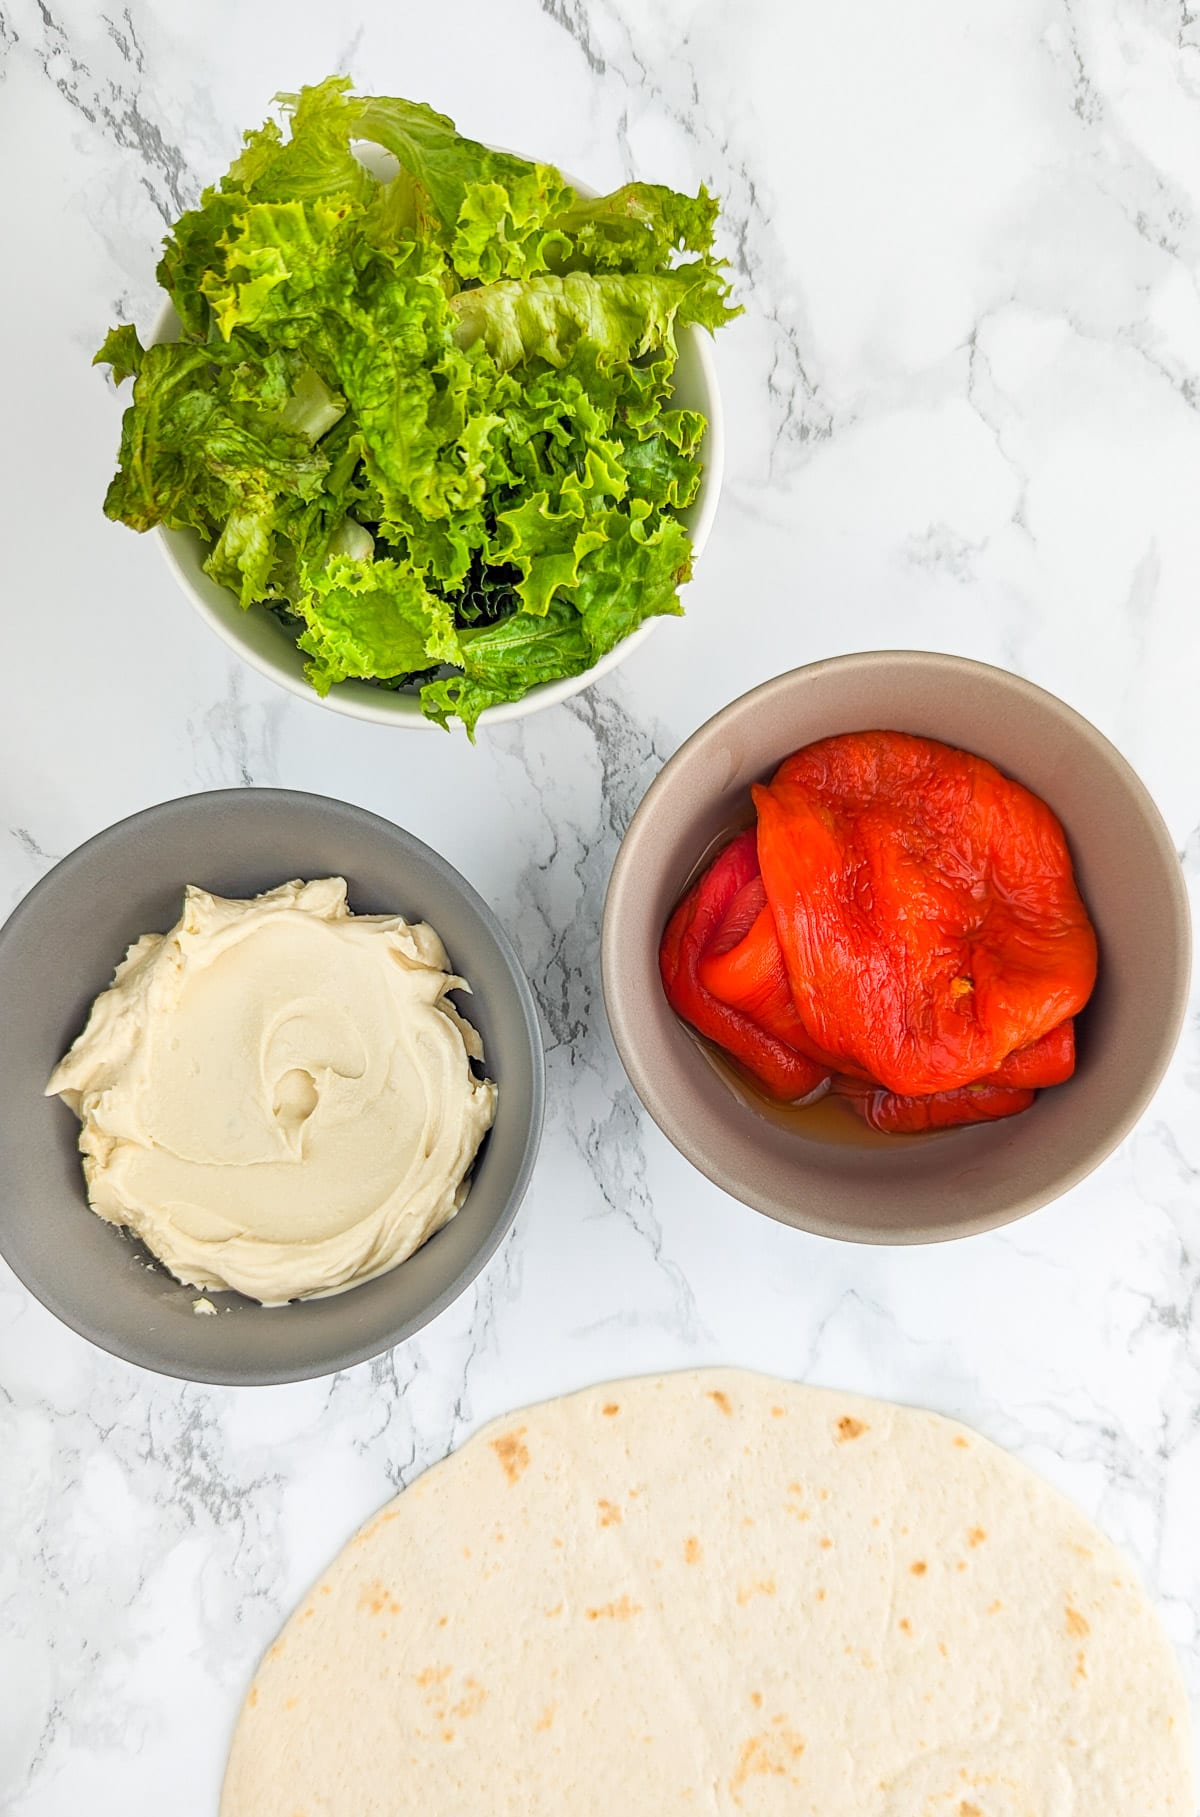 Top view of a bowl with salad, one with cream and one with roasted bell peppers near a slice of pita.